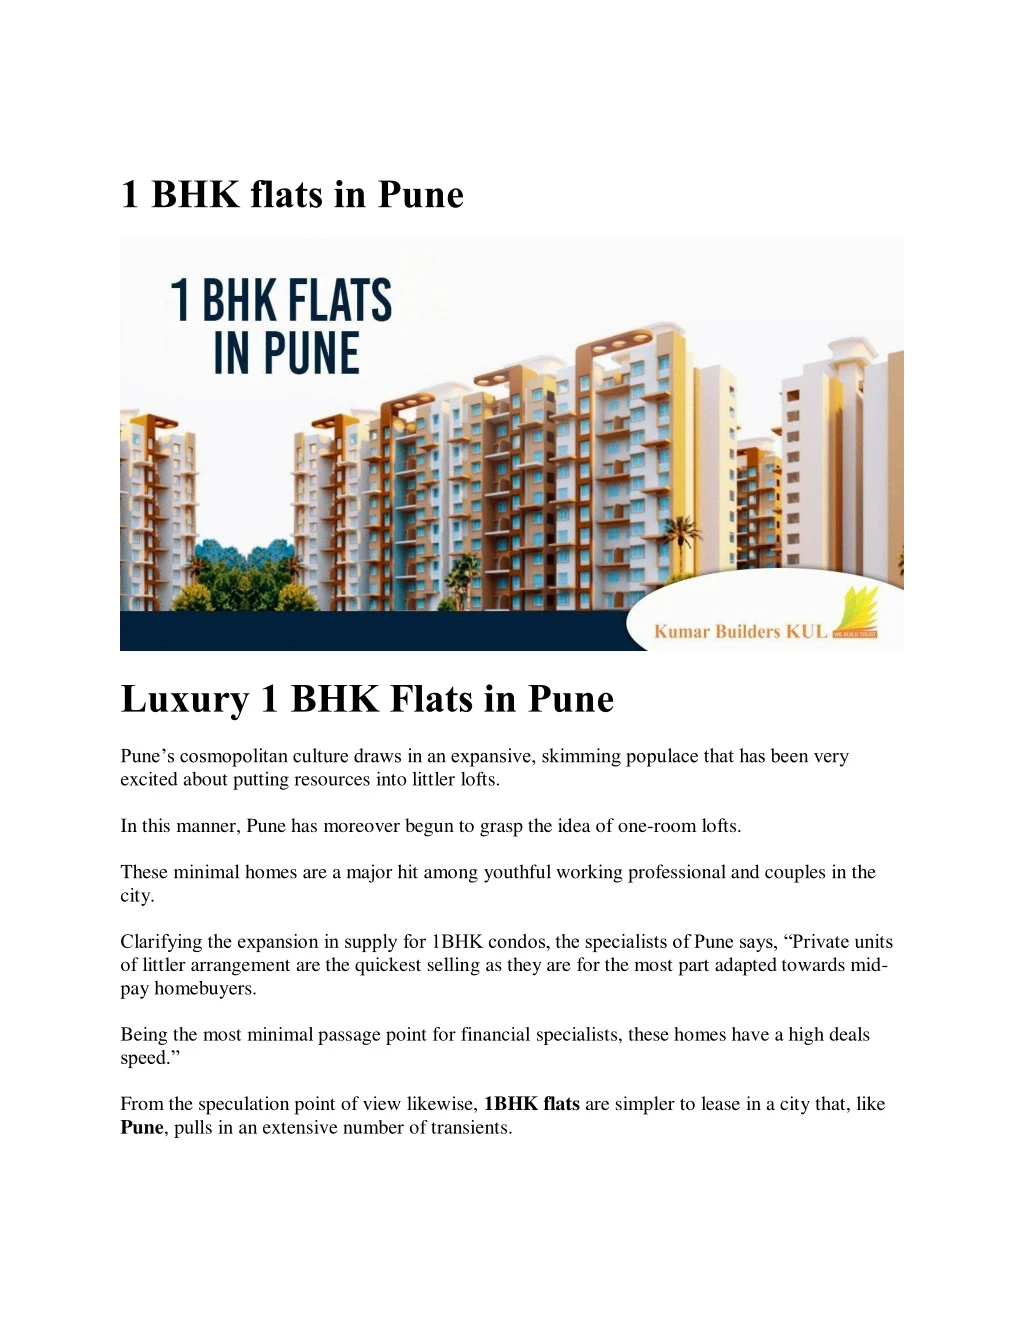 1 bhk flats in pune